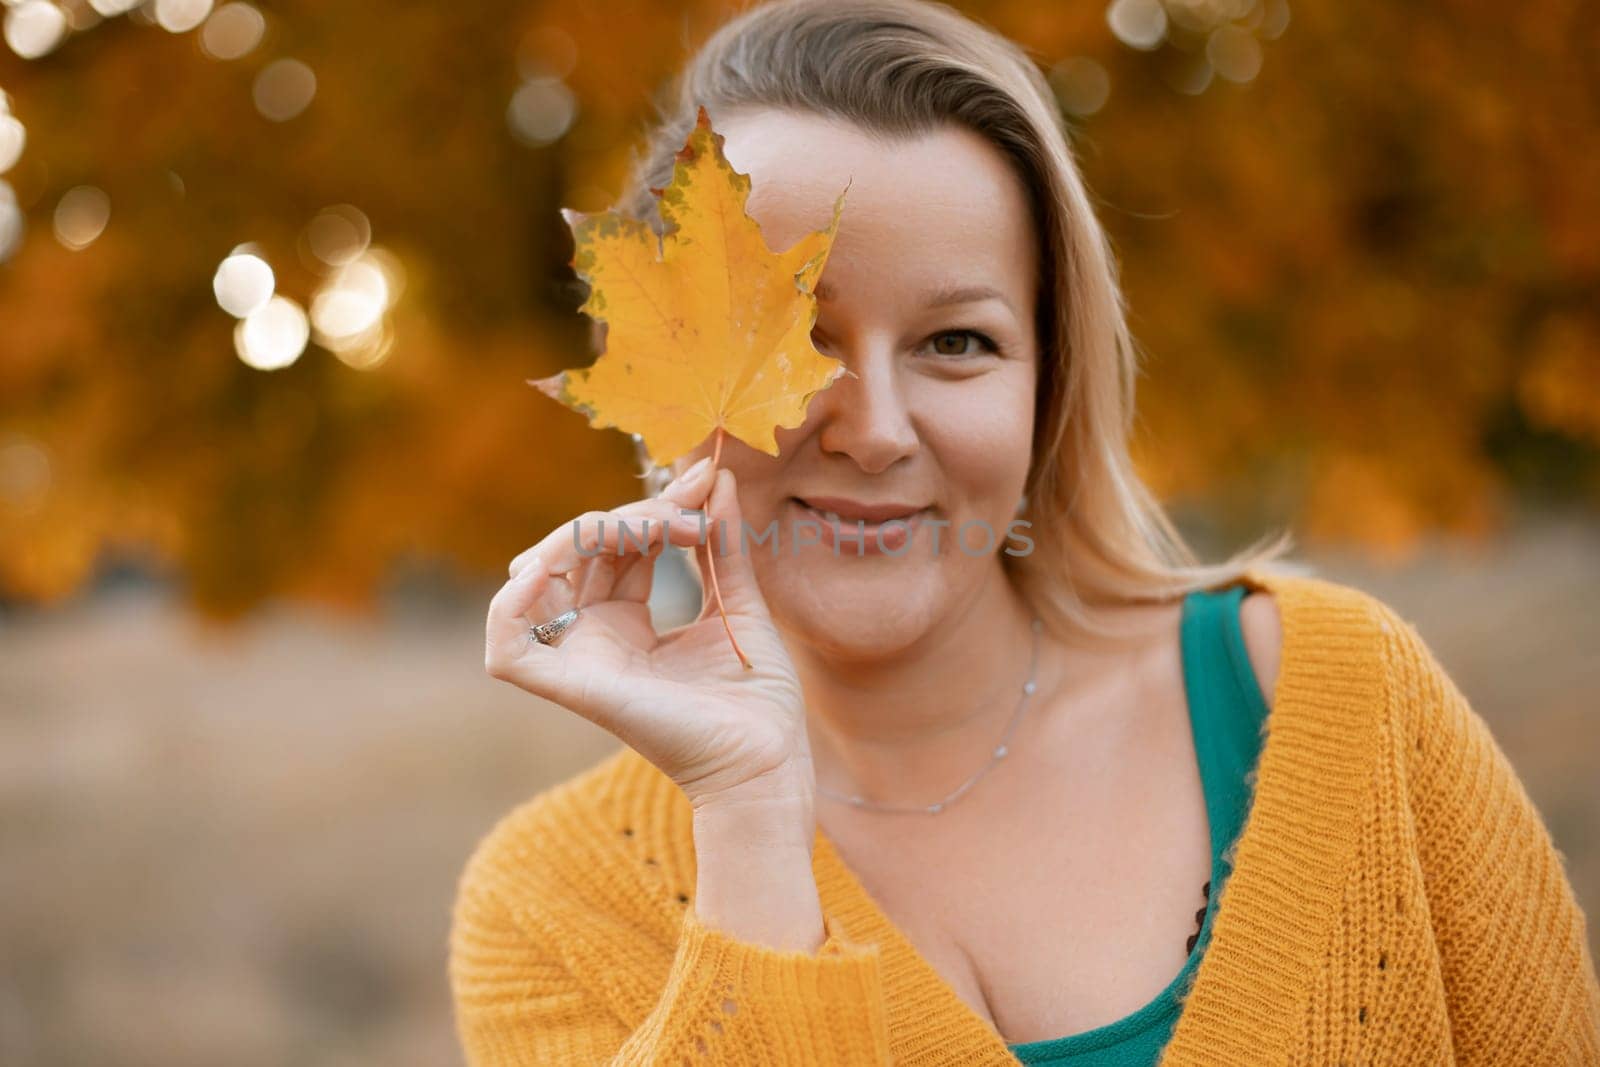 an autumn woman in a green dress holds an autumn leaf in front of her face, against the background of an autumn tree.